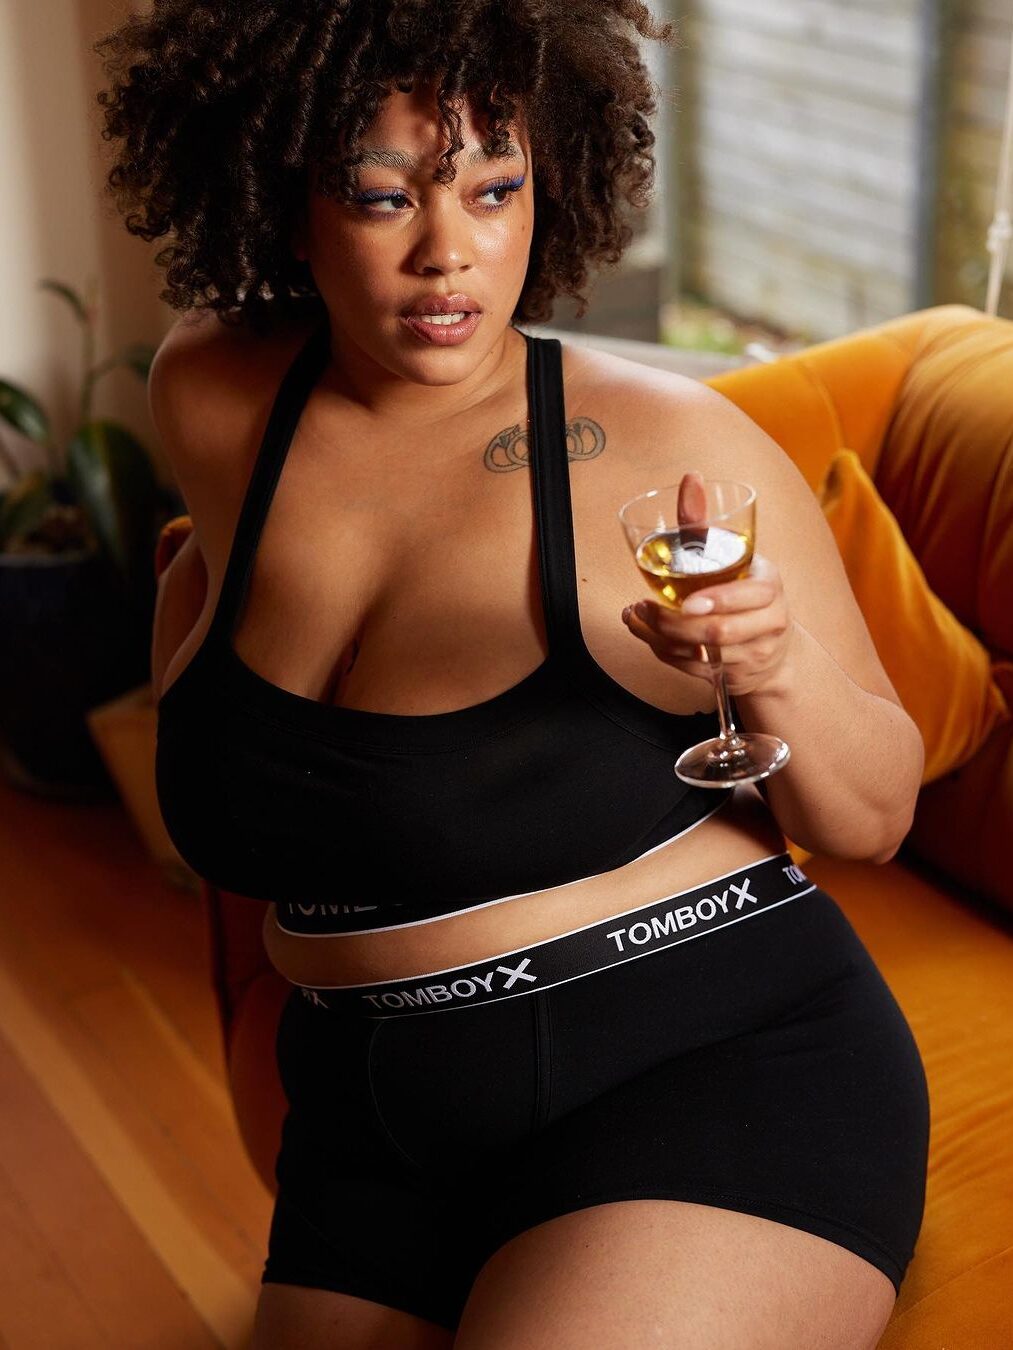 A model seated in a bedroom setting holding a glass of white wine, wearing a black TomboyX lingerie set, including boyshorts and a bralette.